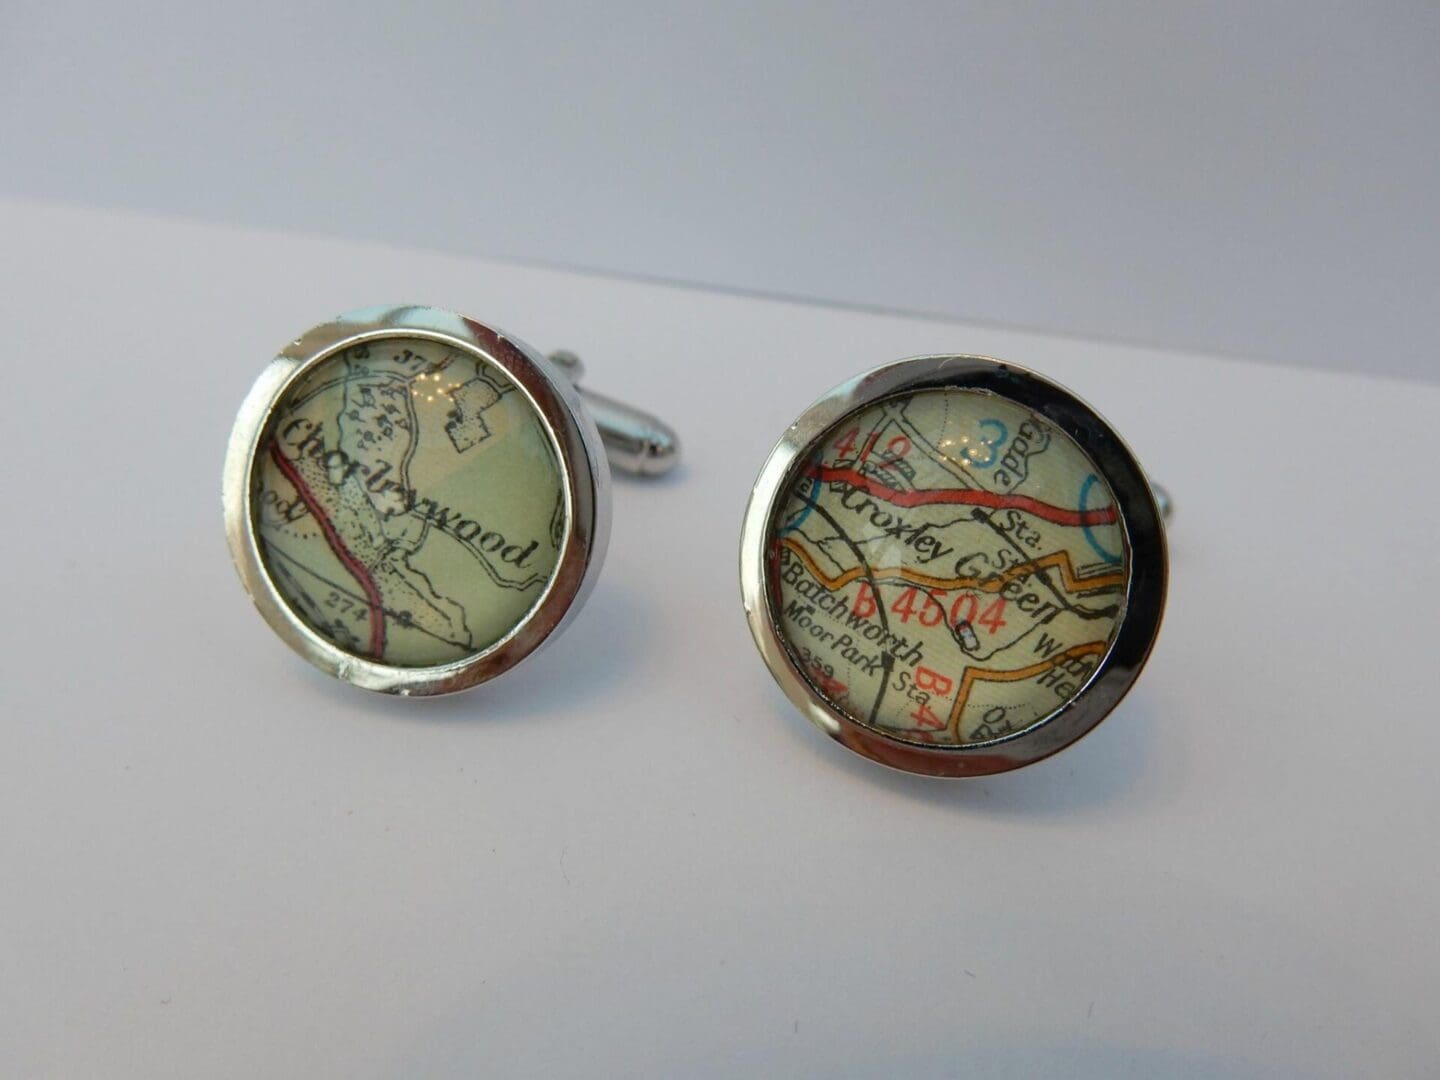 Unique custom map cufflinks personalised with your favourite locations.